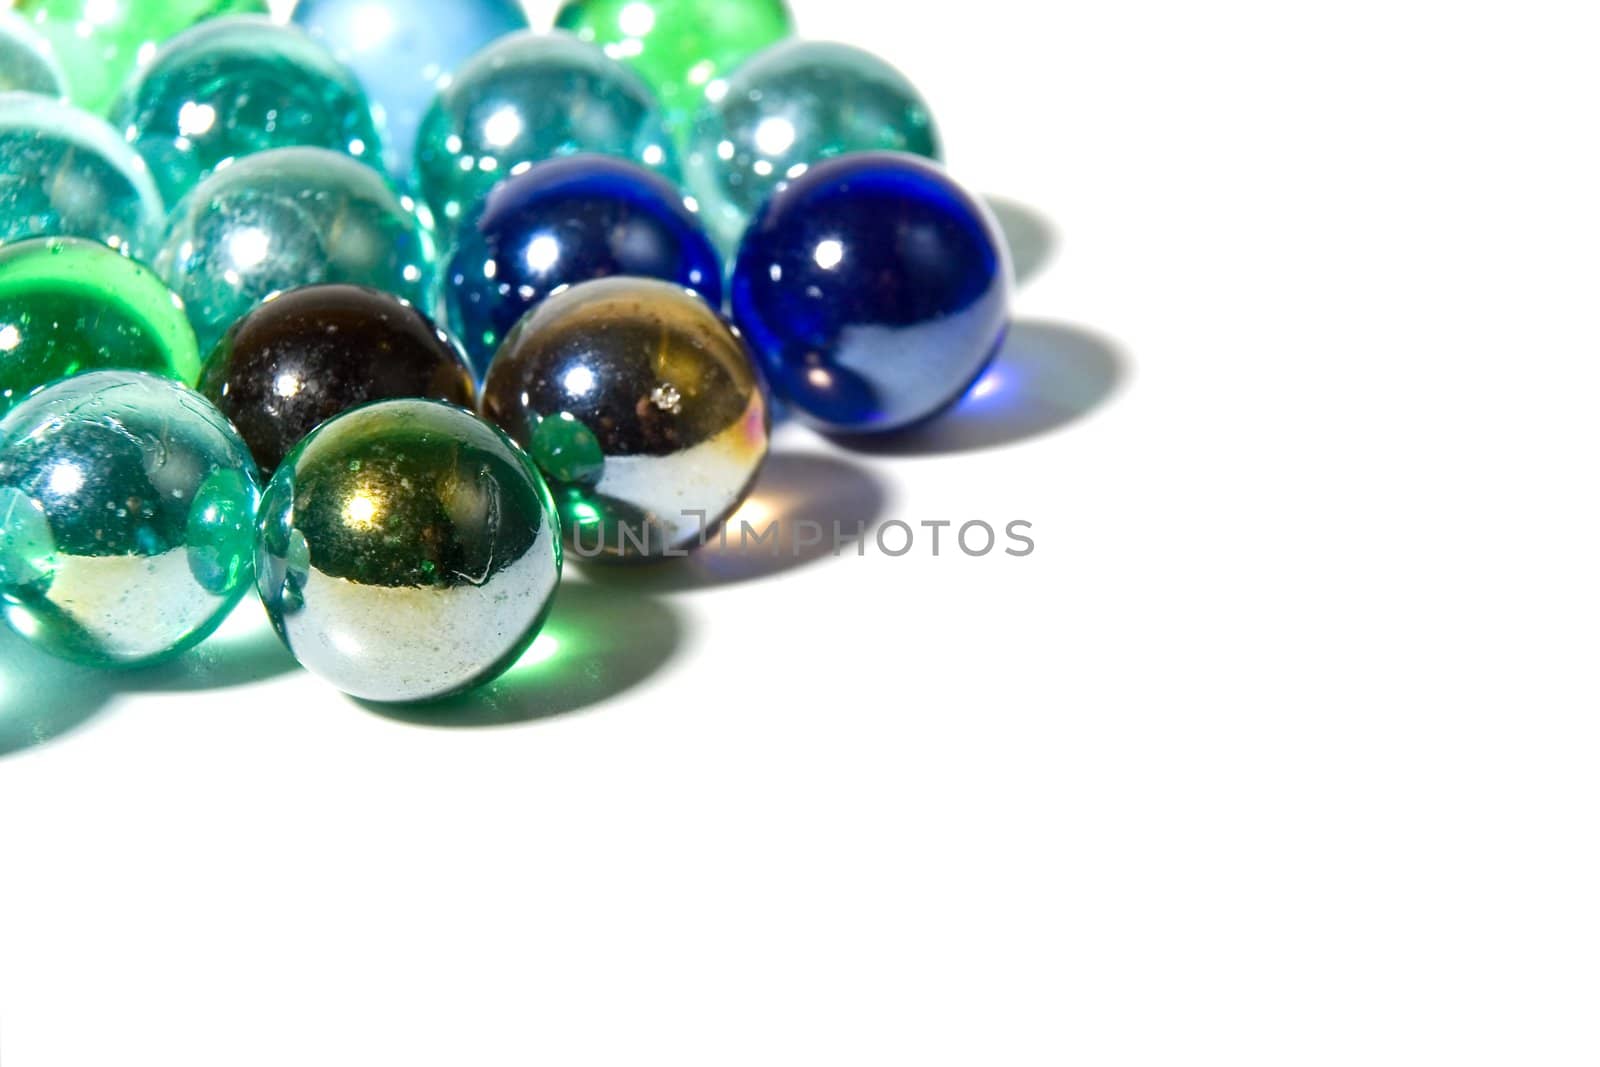 Studio shot of varicolored beautiful glass marbles on a white background